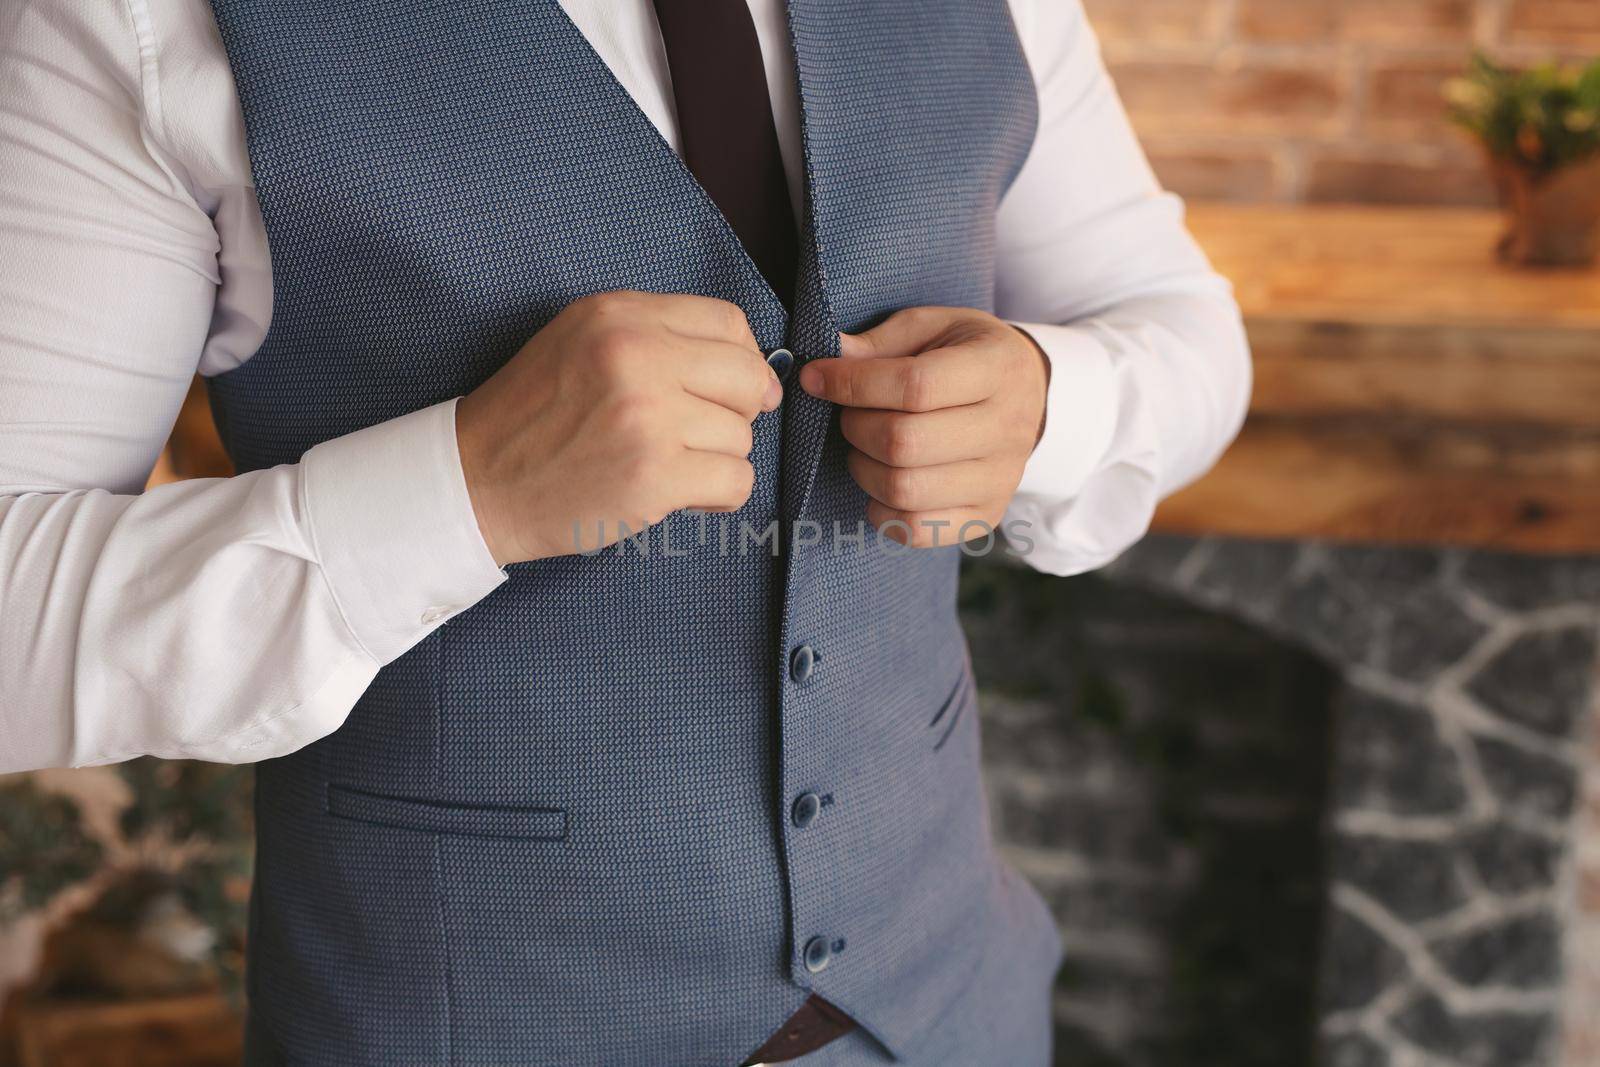 A man puts on a wedding suit and fastens a button by StudioPeace